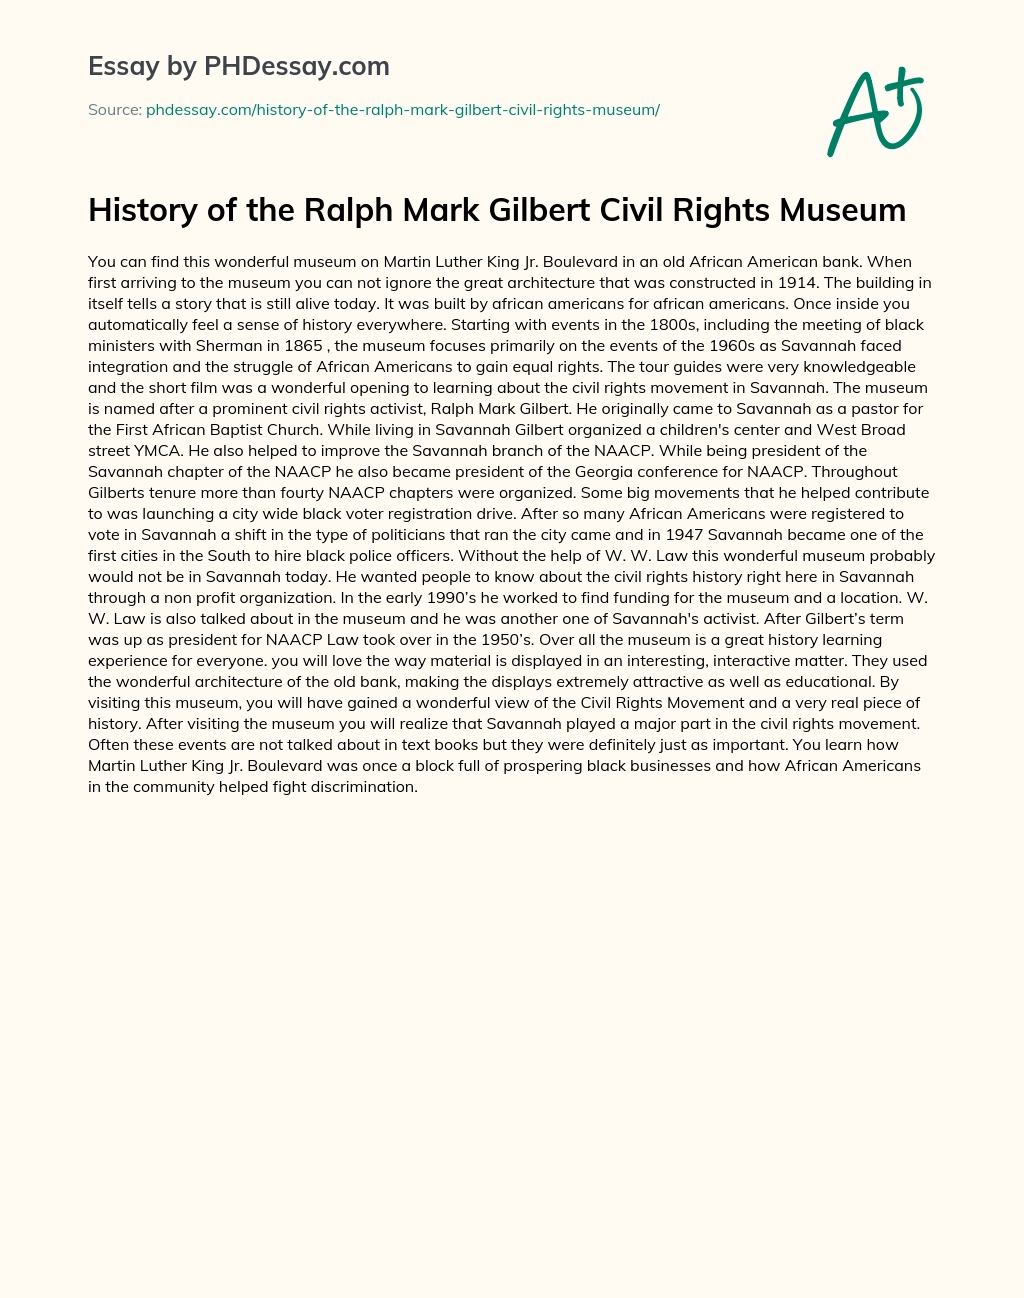 History of the Ralph Mark Gilbert Civil Rights Museum essay